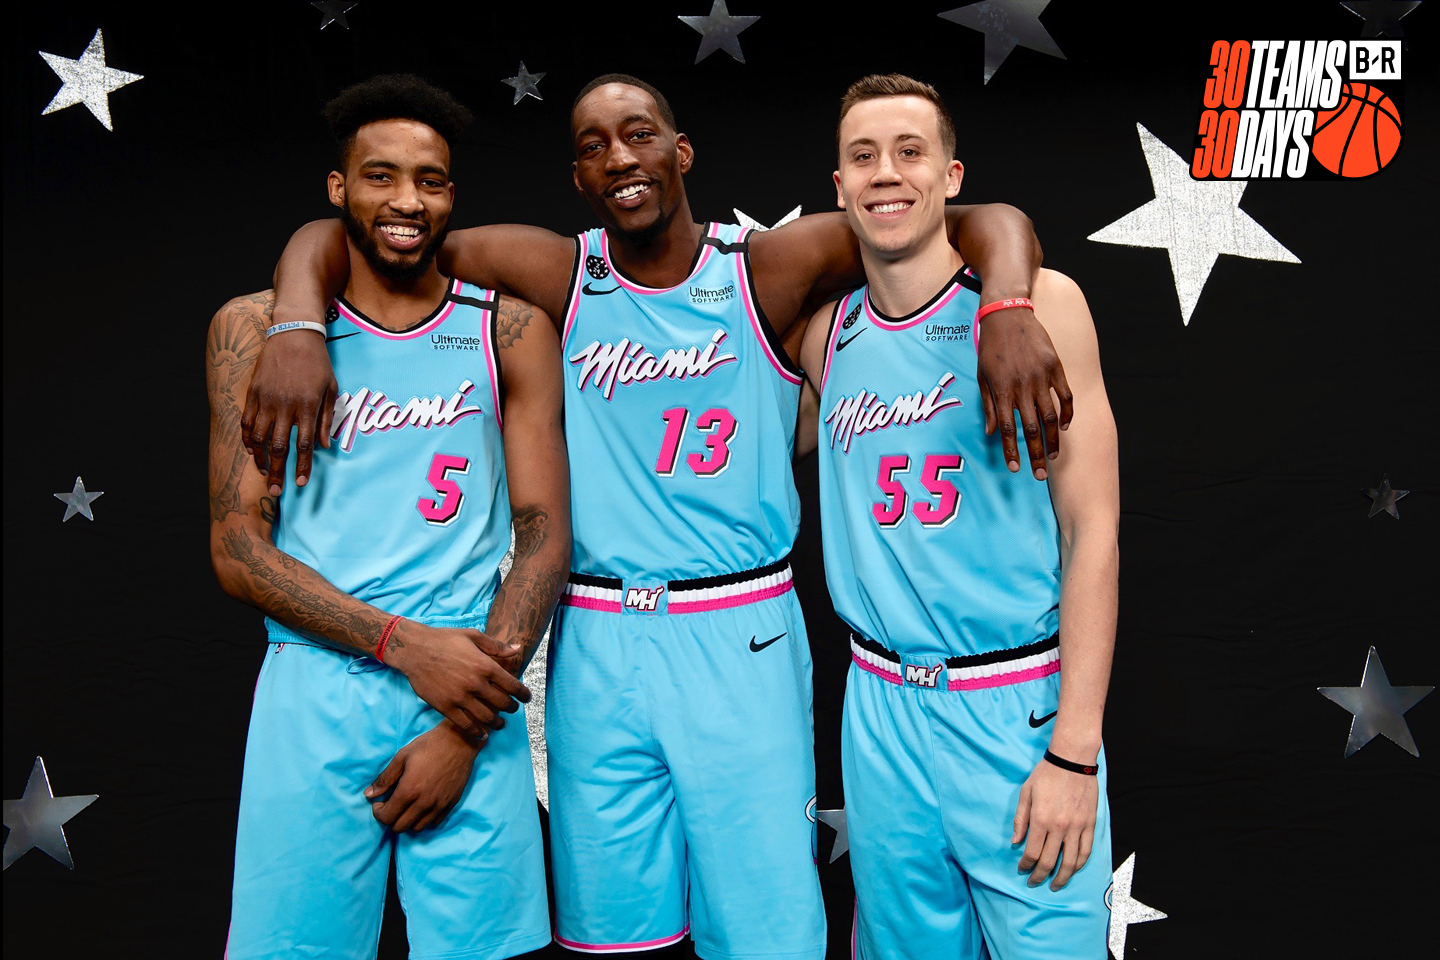 For their newest uniforms, the Miami Heat go Miami 'Vice